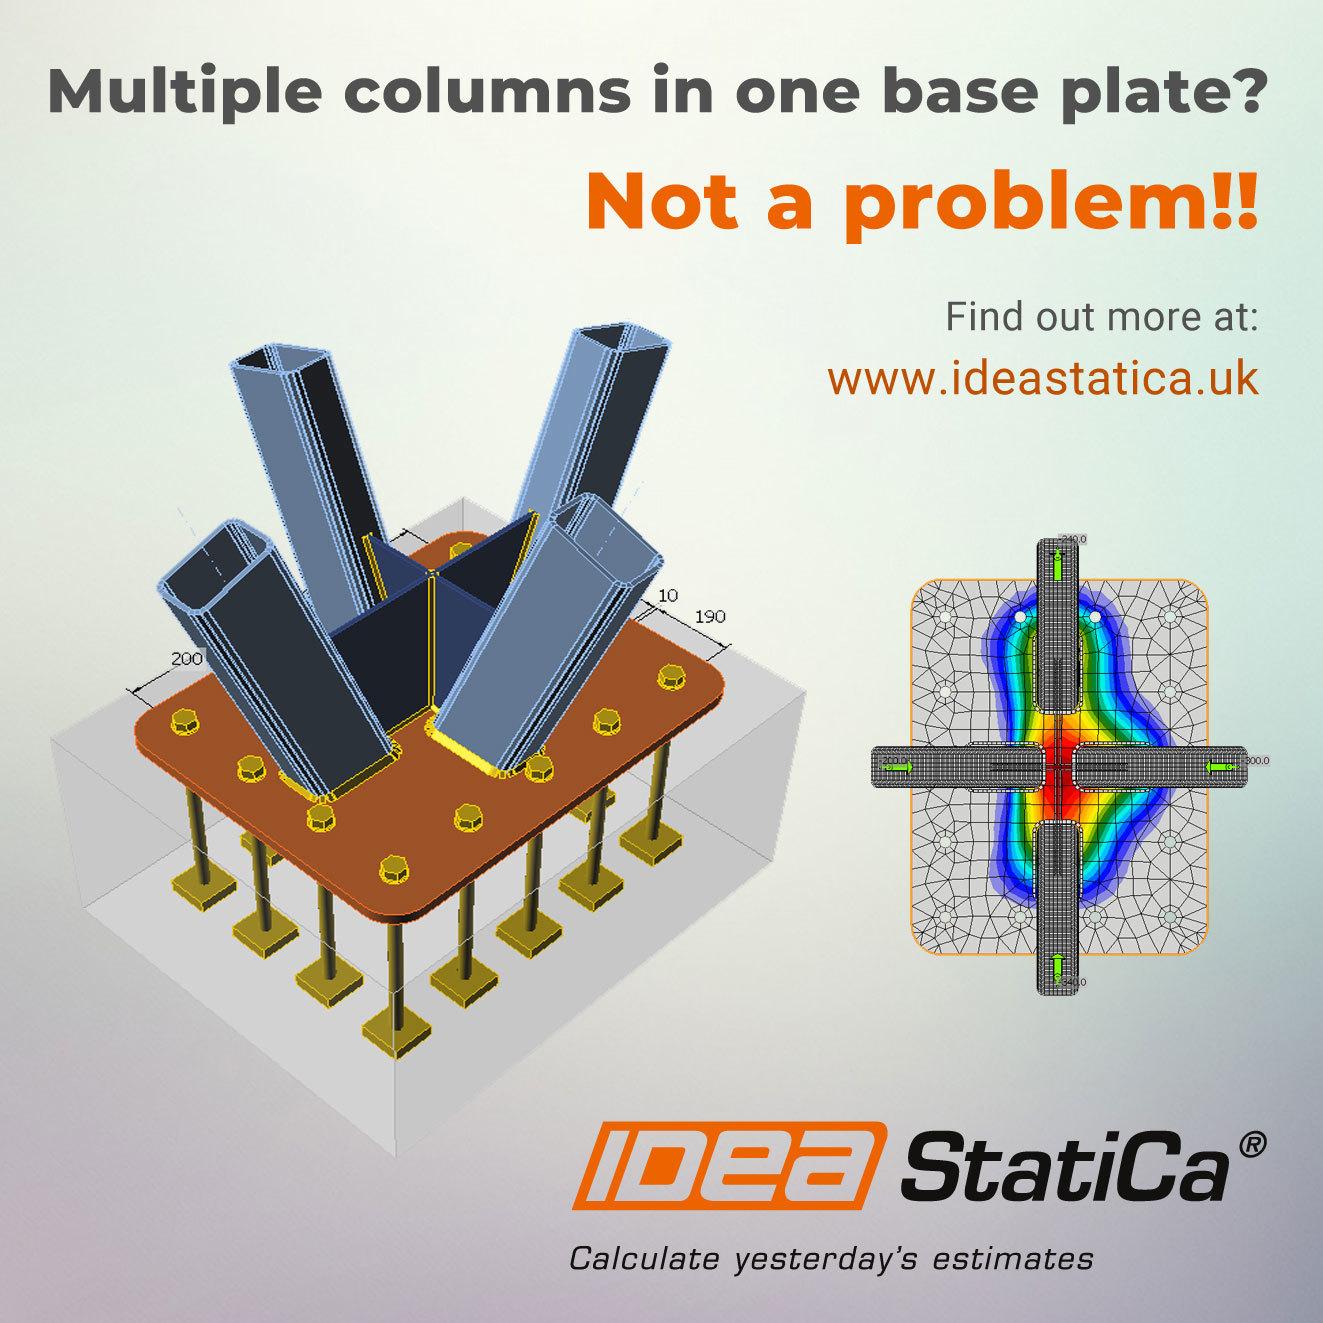 Multiple columns in one base plate? NOT A PROBLEM!!